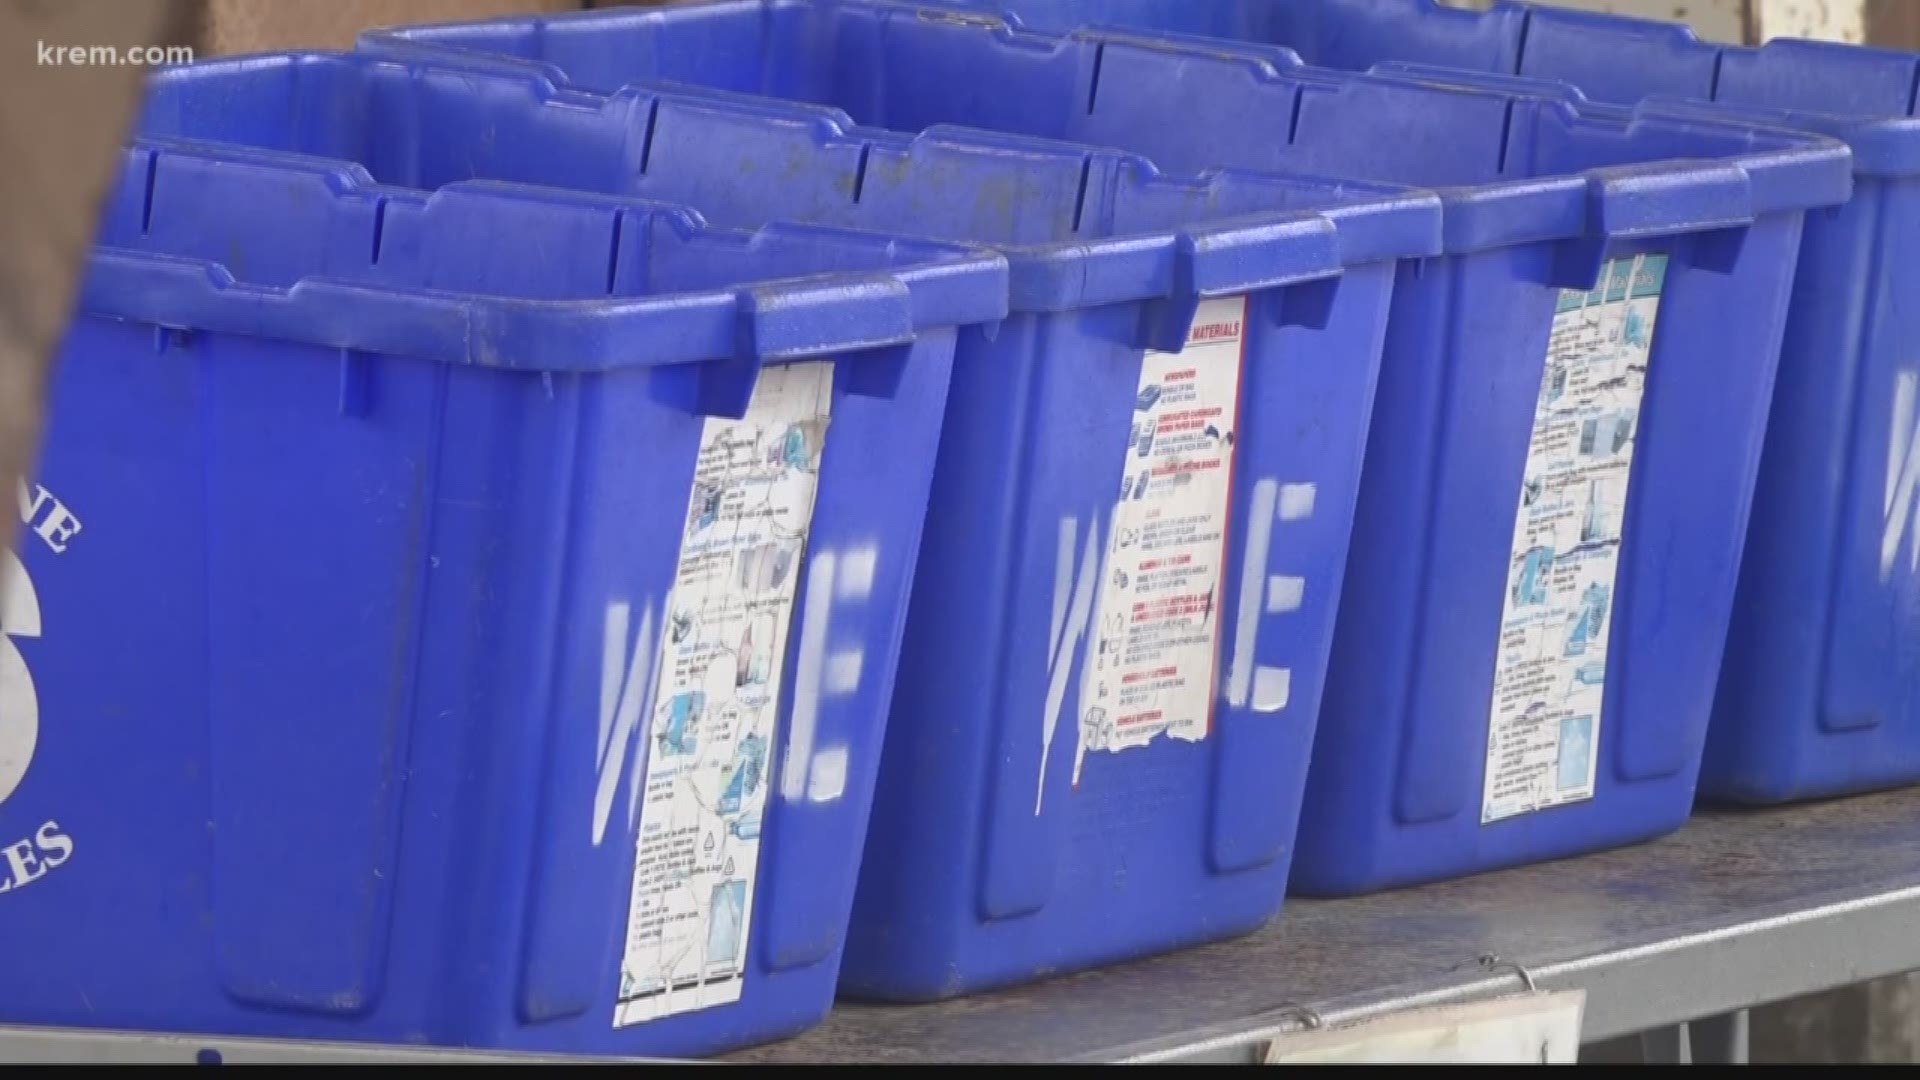 'Essential' items includes those that could rot or cause pest issues.The Spokane County waste transfer station is still accepting all drop-offs.